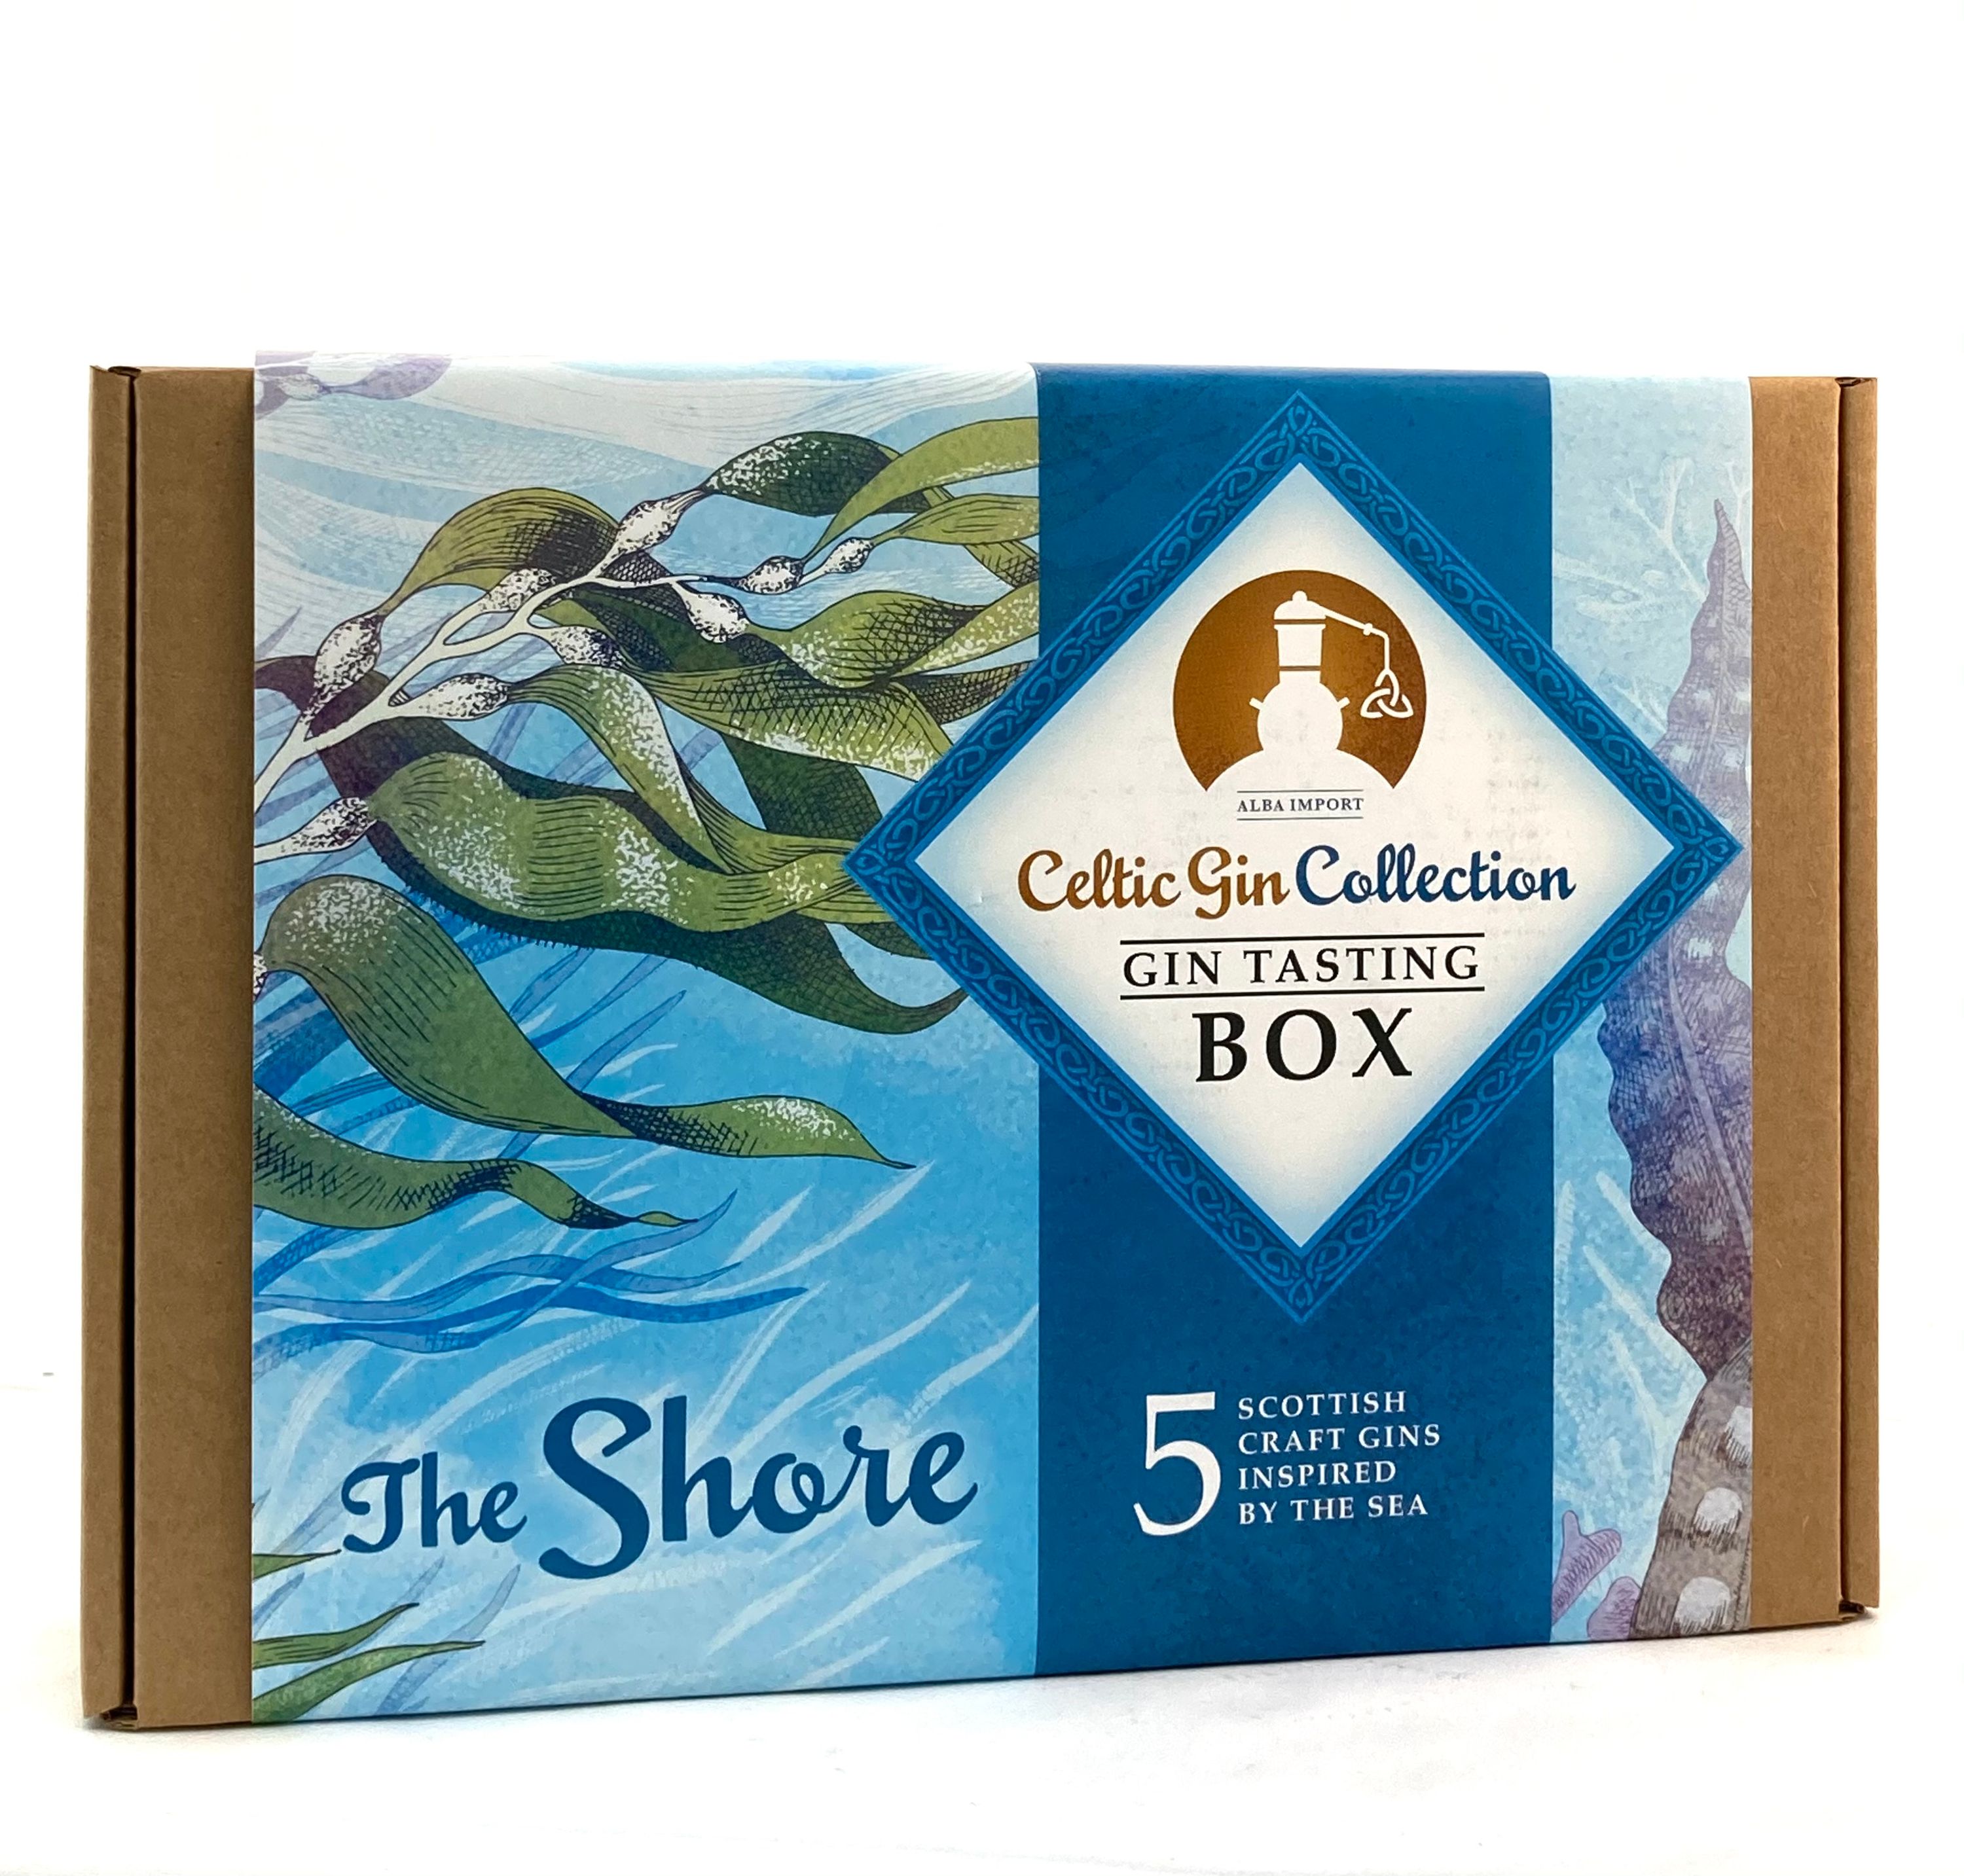 Celtic Gin Collection Tasting Box "The Shore" 5x0.04l 